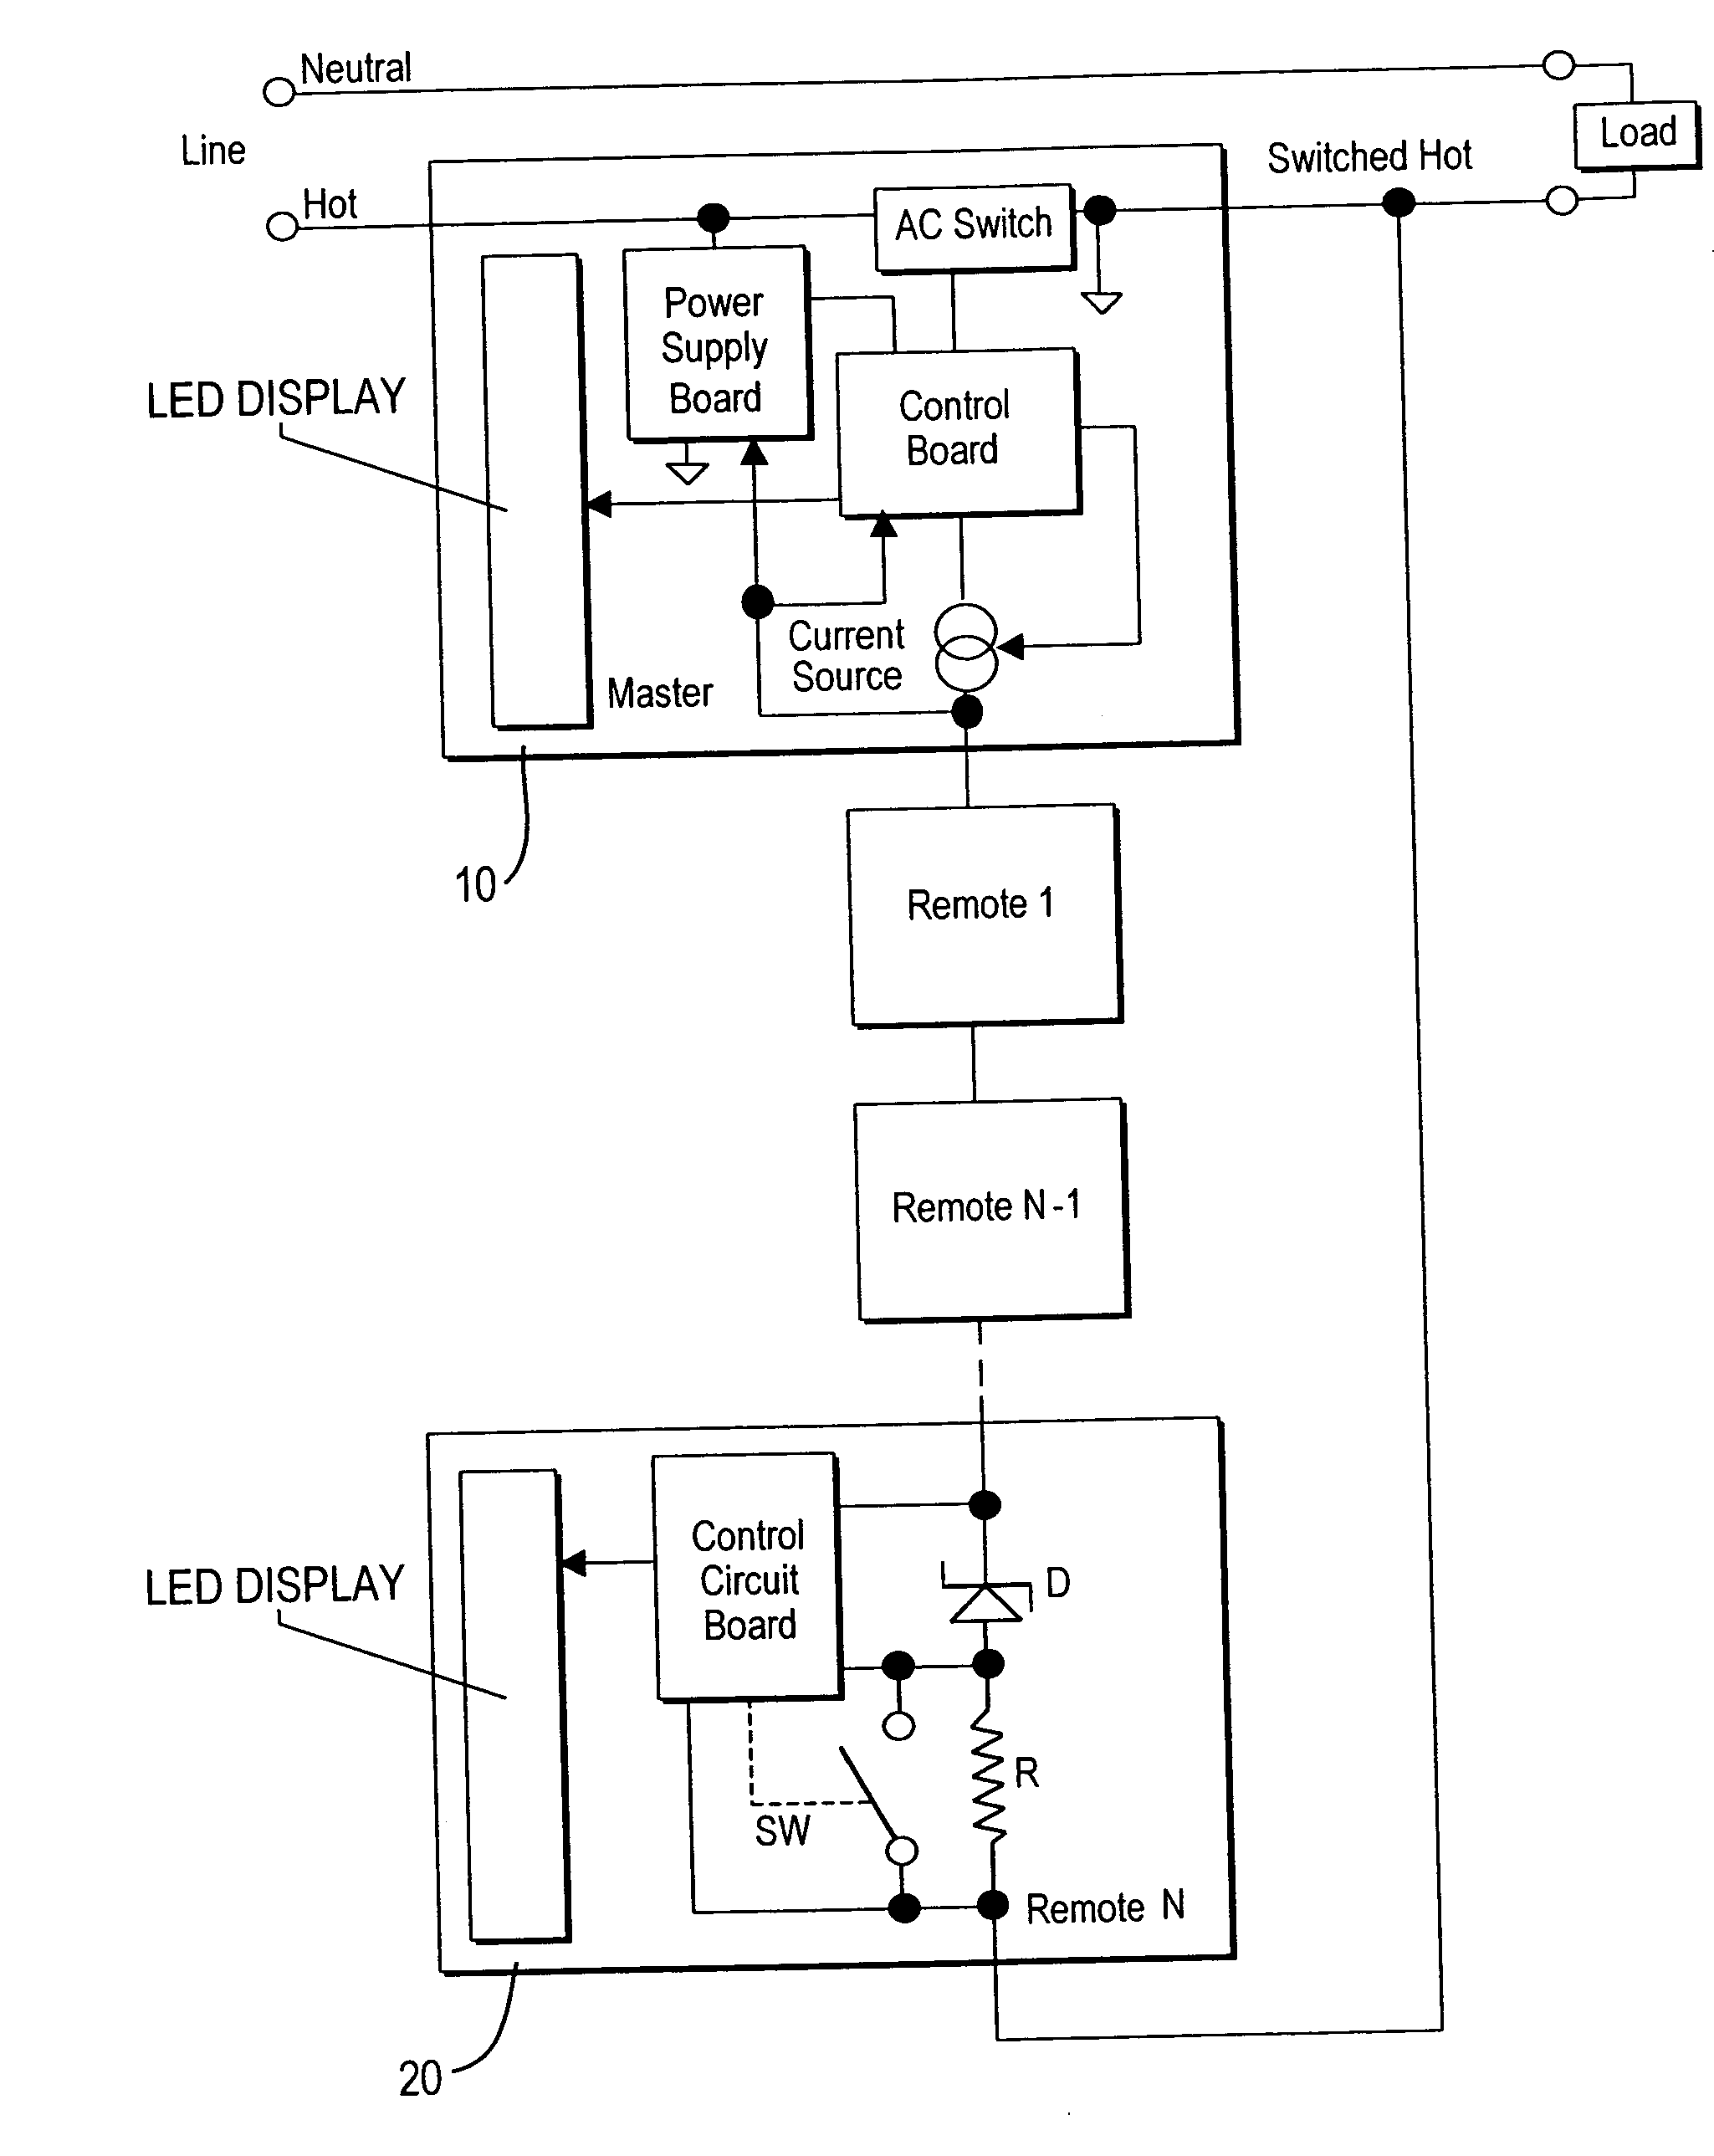 Dimmer control system with tandem power supplies